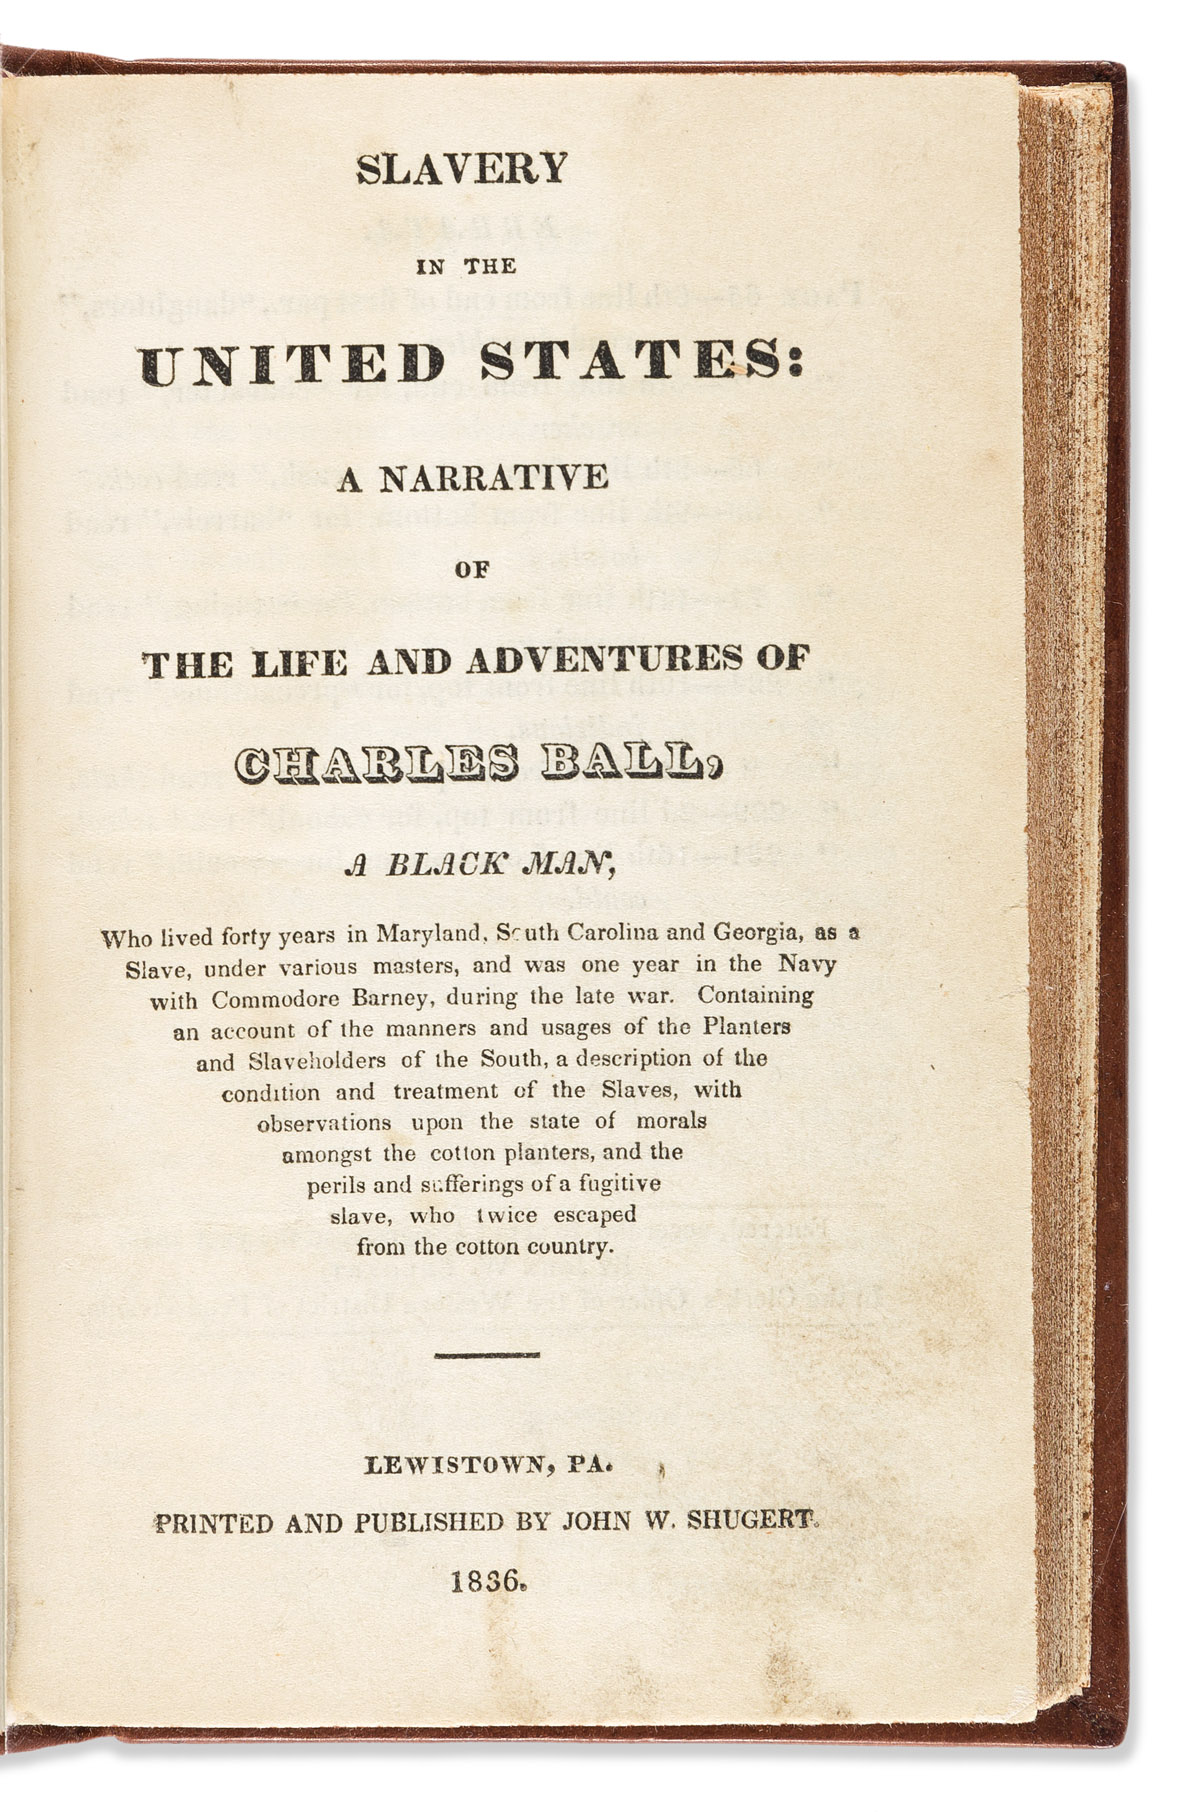 (SLAVERY & ABOLITION.) Slavery in the United States: A Narrative of the Life and Adventures of Charles Ball, a Black Man.